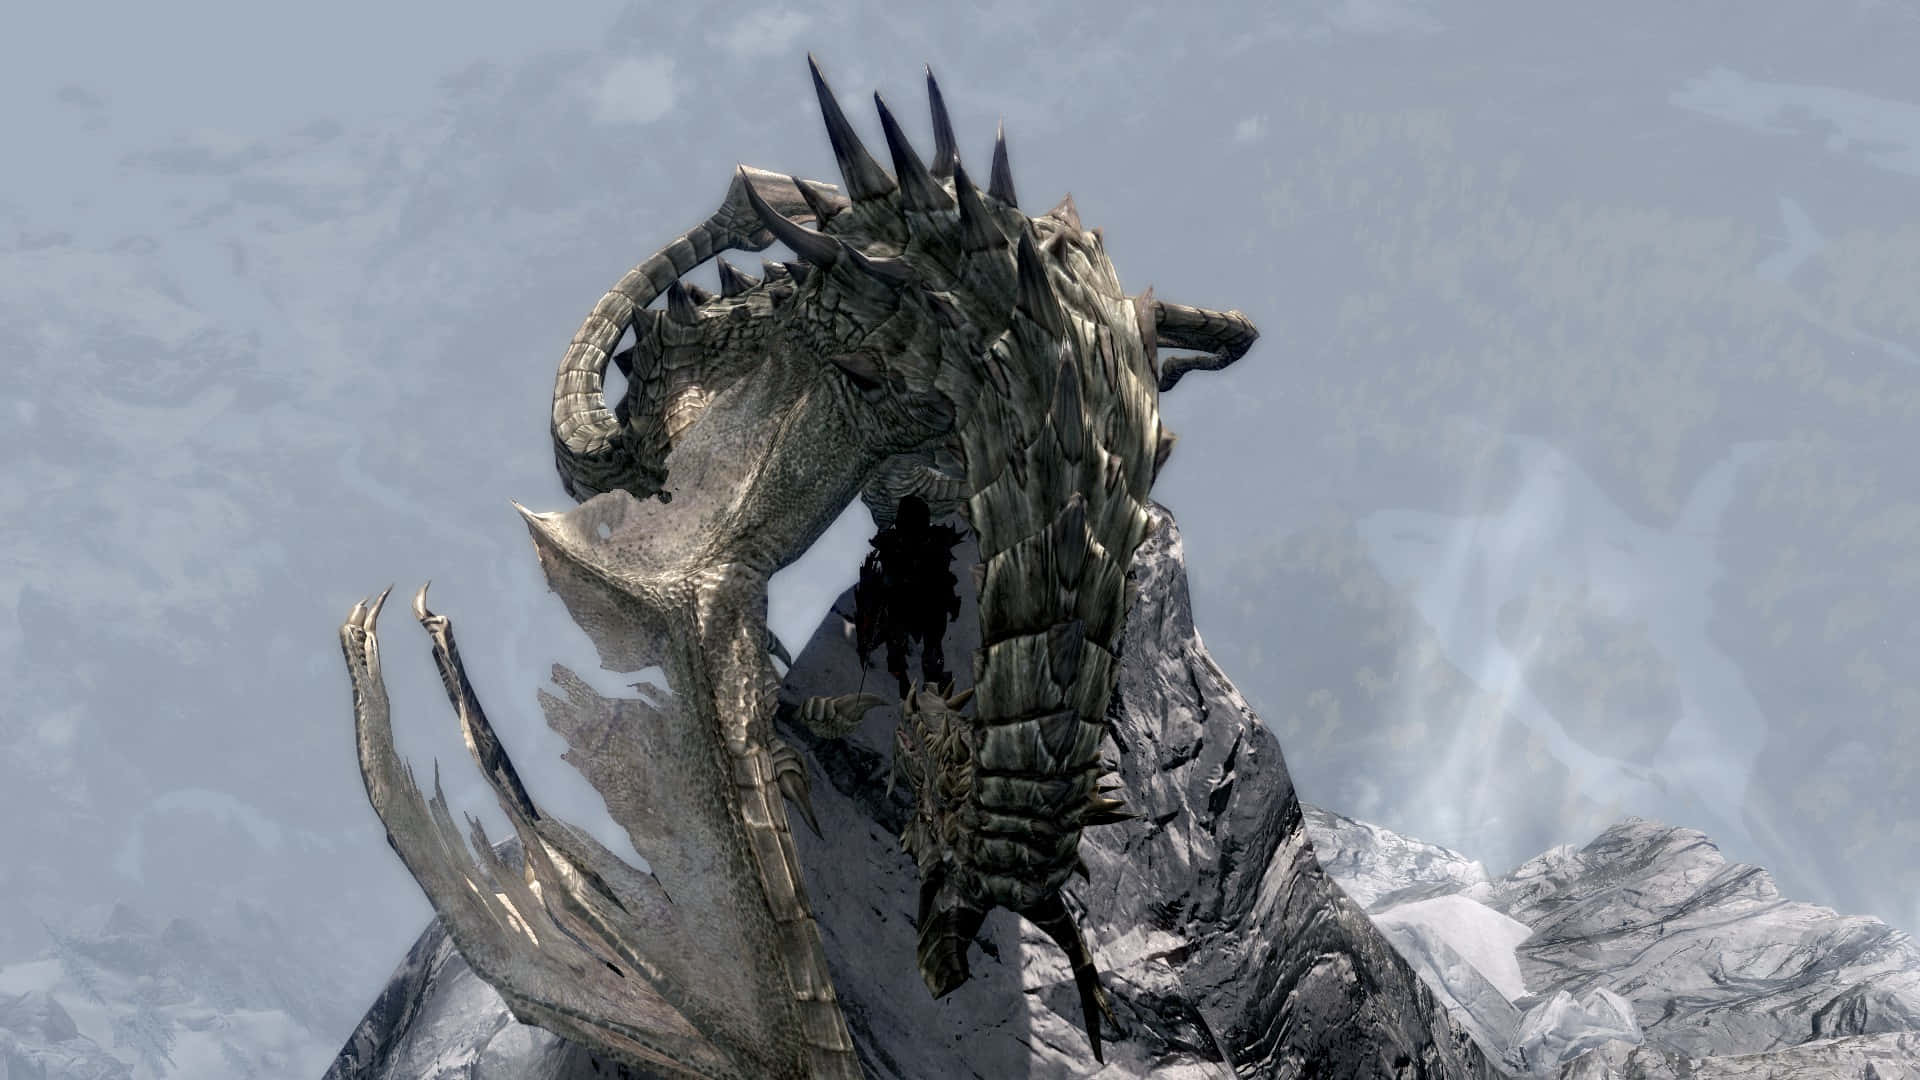 Majestic Paarthurnax perched on the Throat of the World in Skyrim Wallpaper